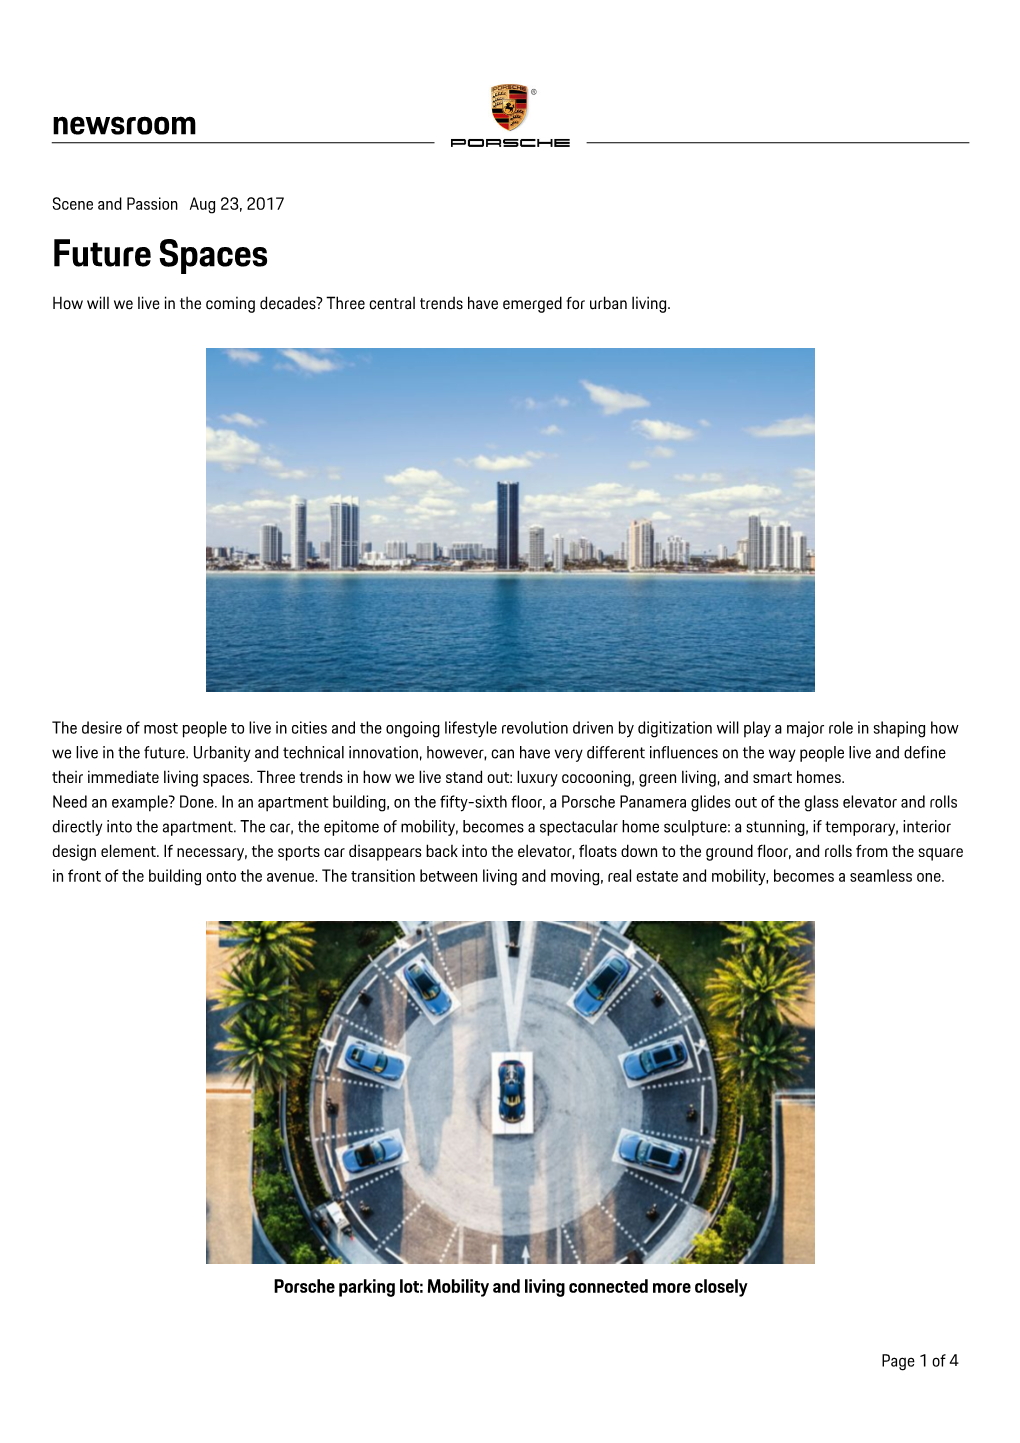 Future Spaces How Will We Live in the Coming Decades? Three Central Trends Have Emerged for Urban Living